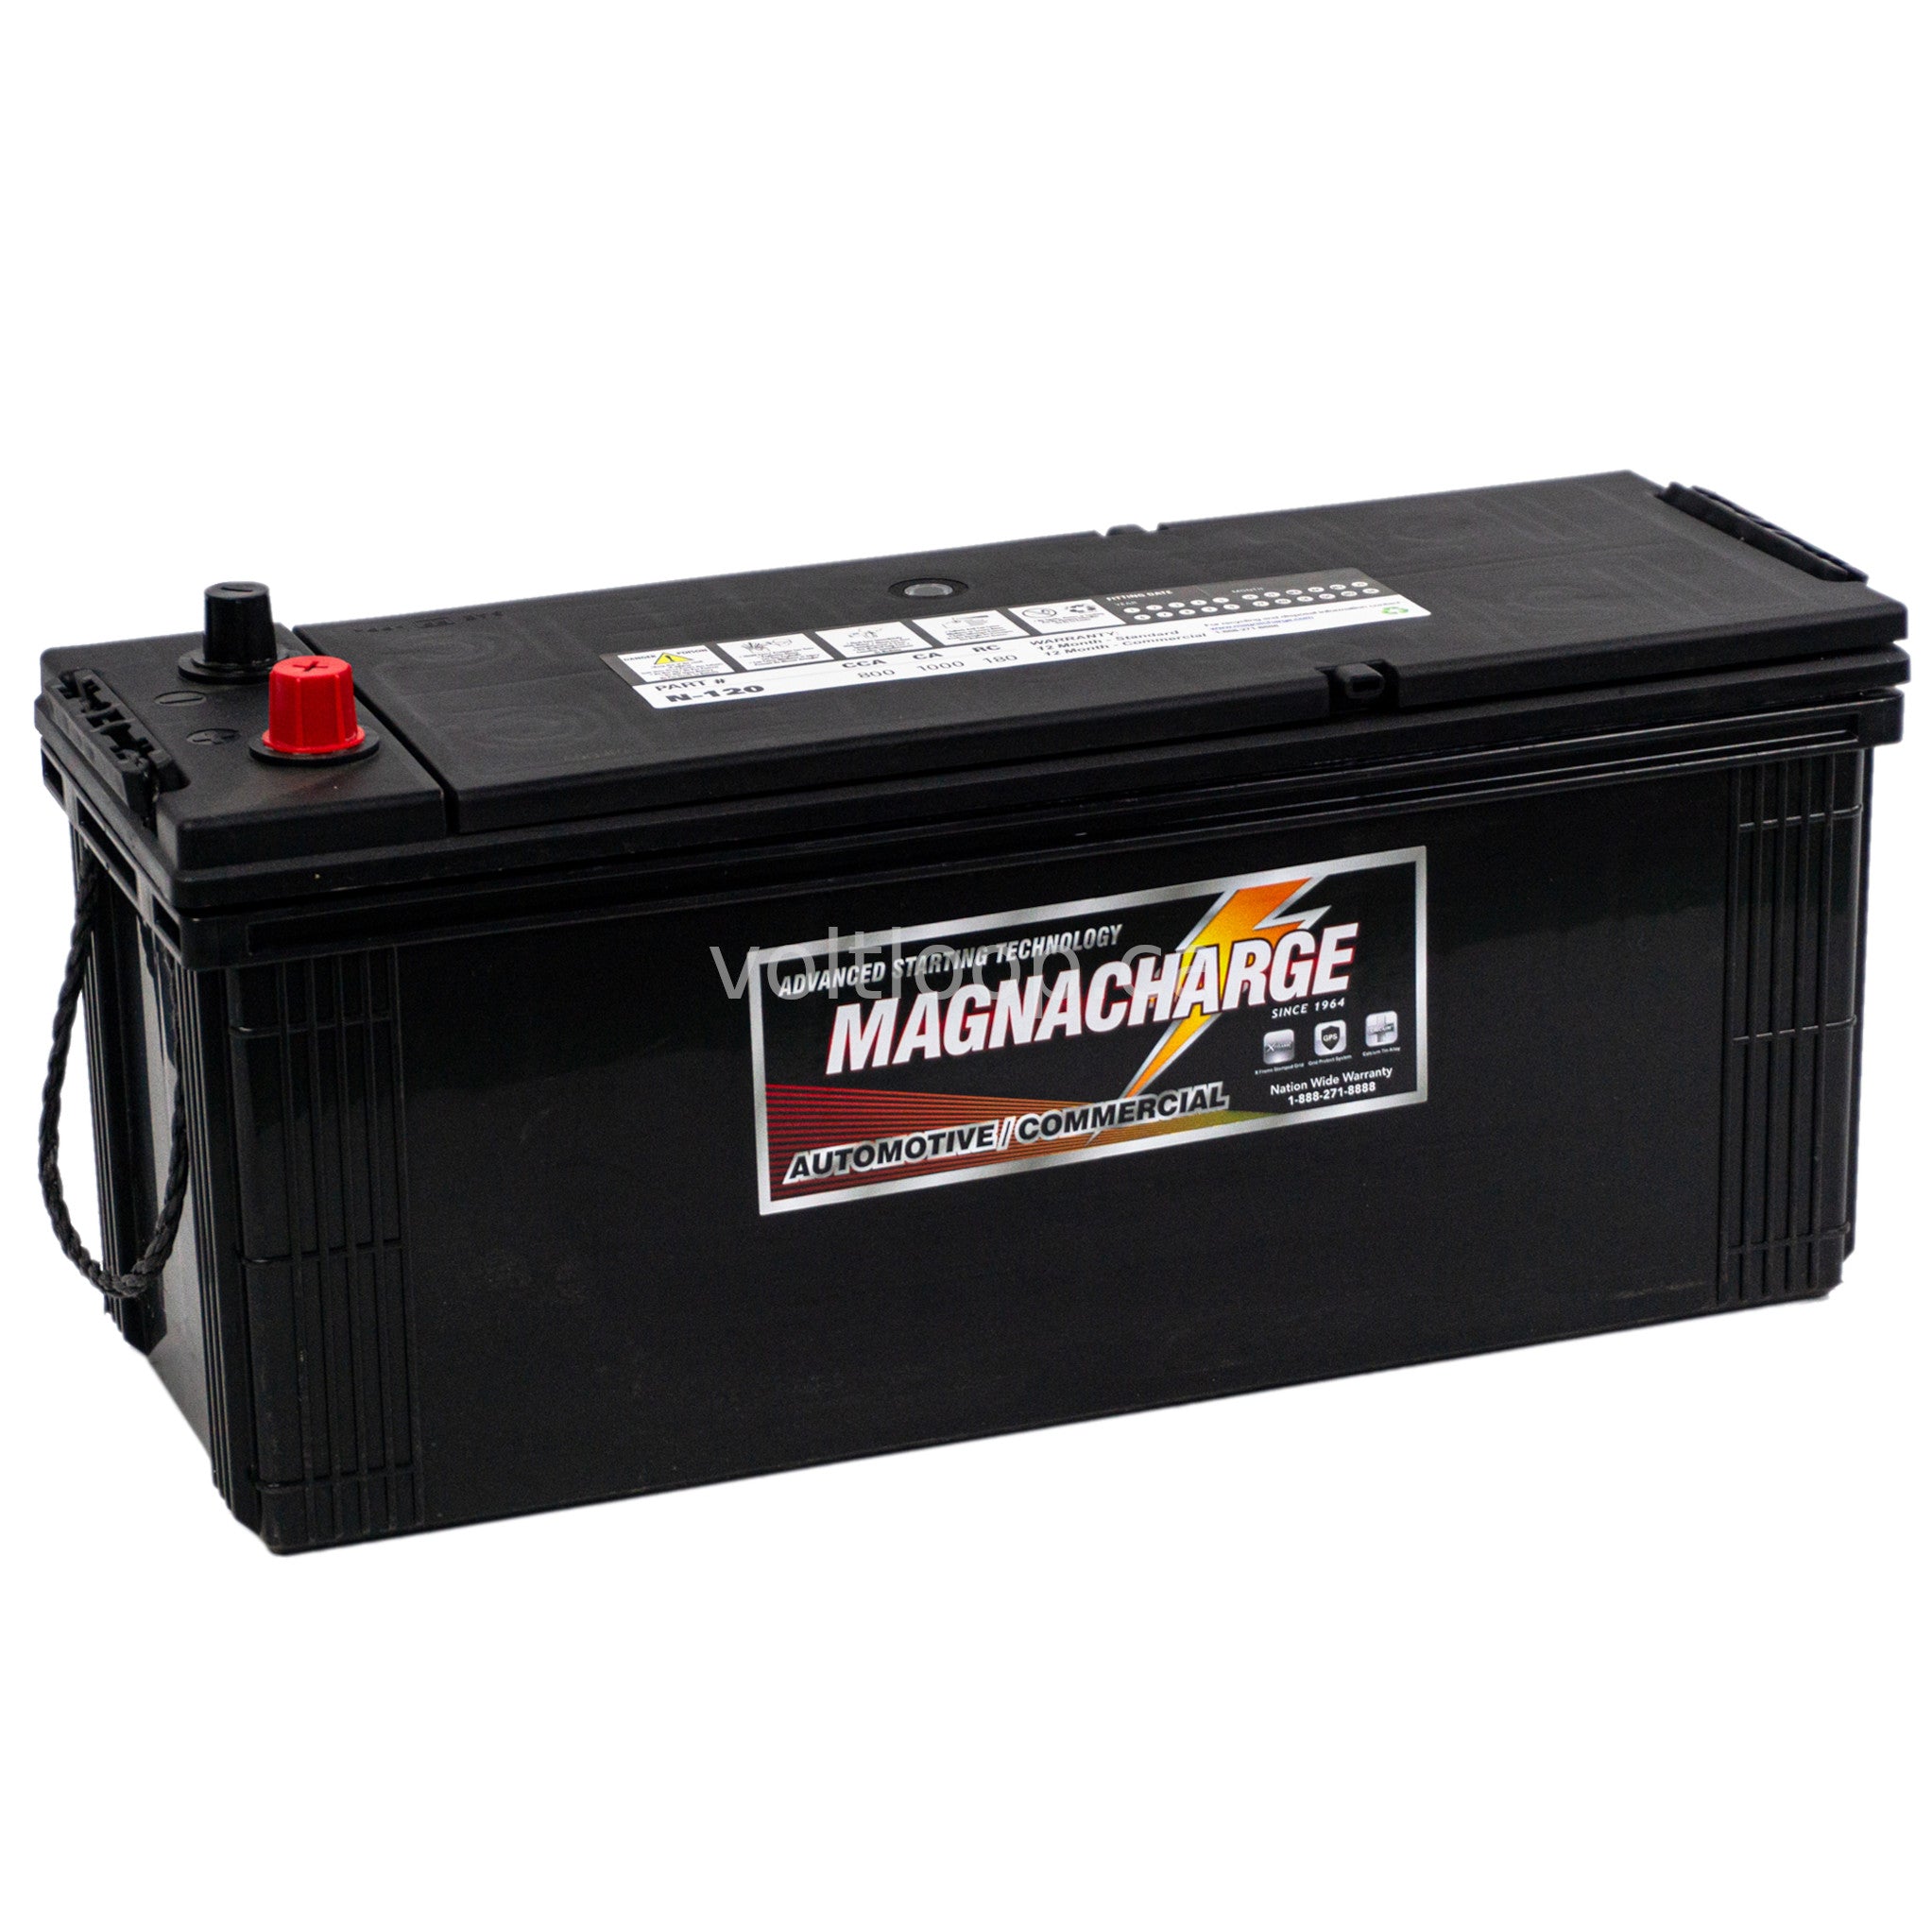 Magnacharge N-120 12V Commercial & Truck Battery